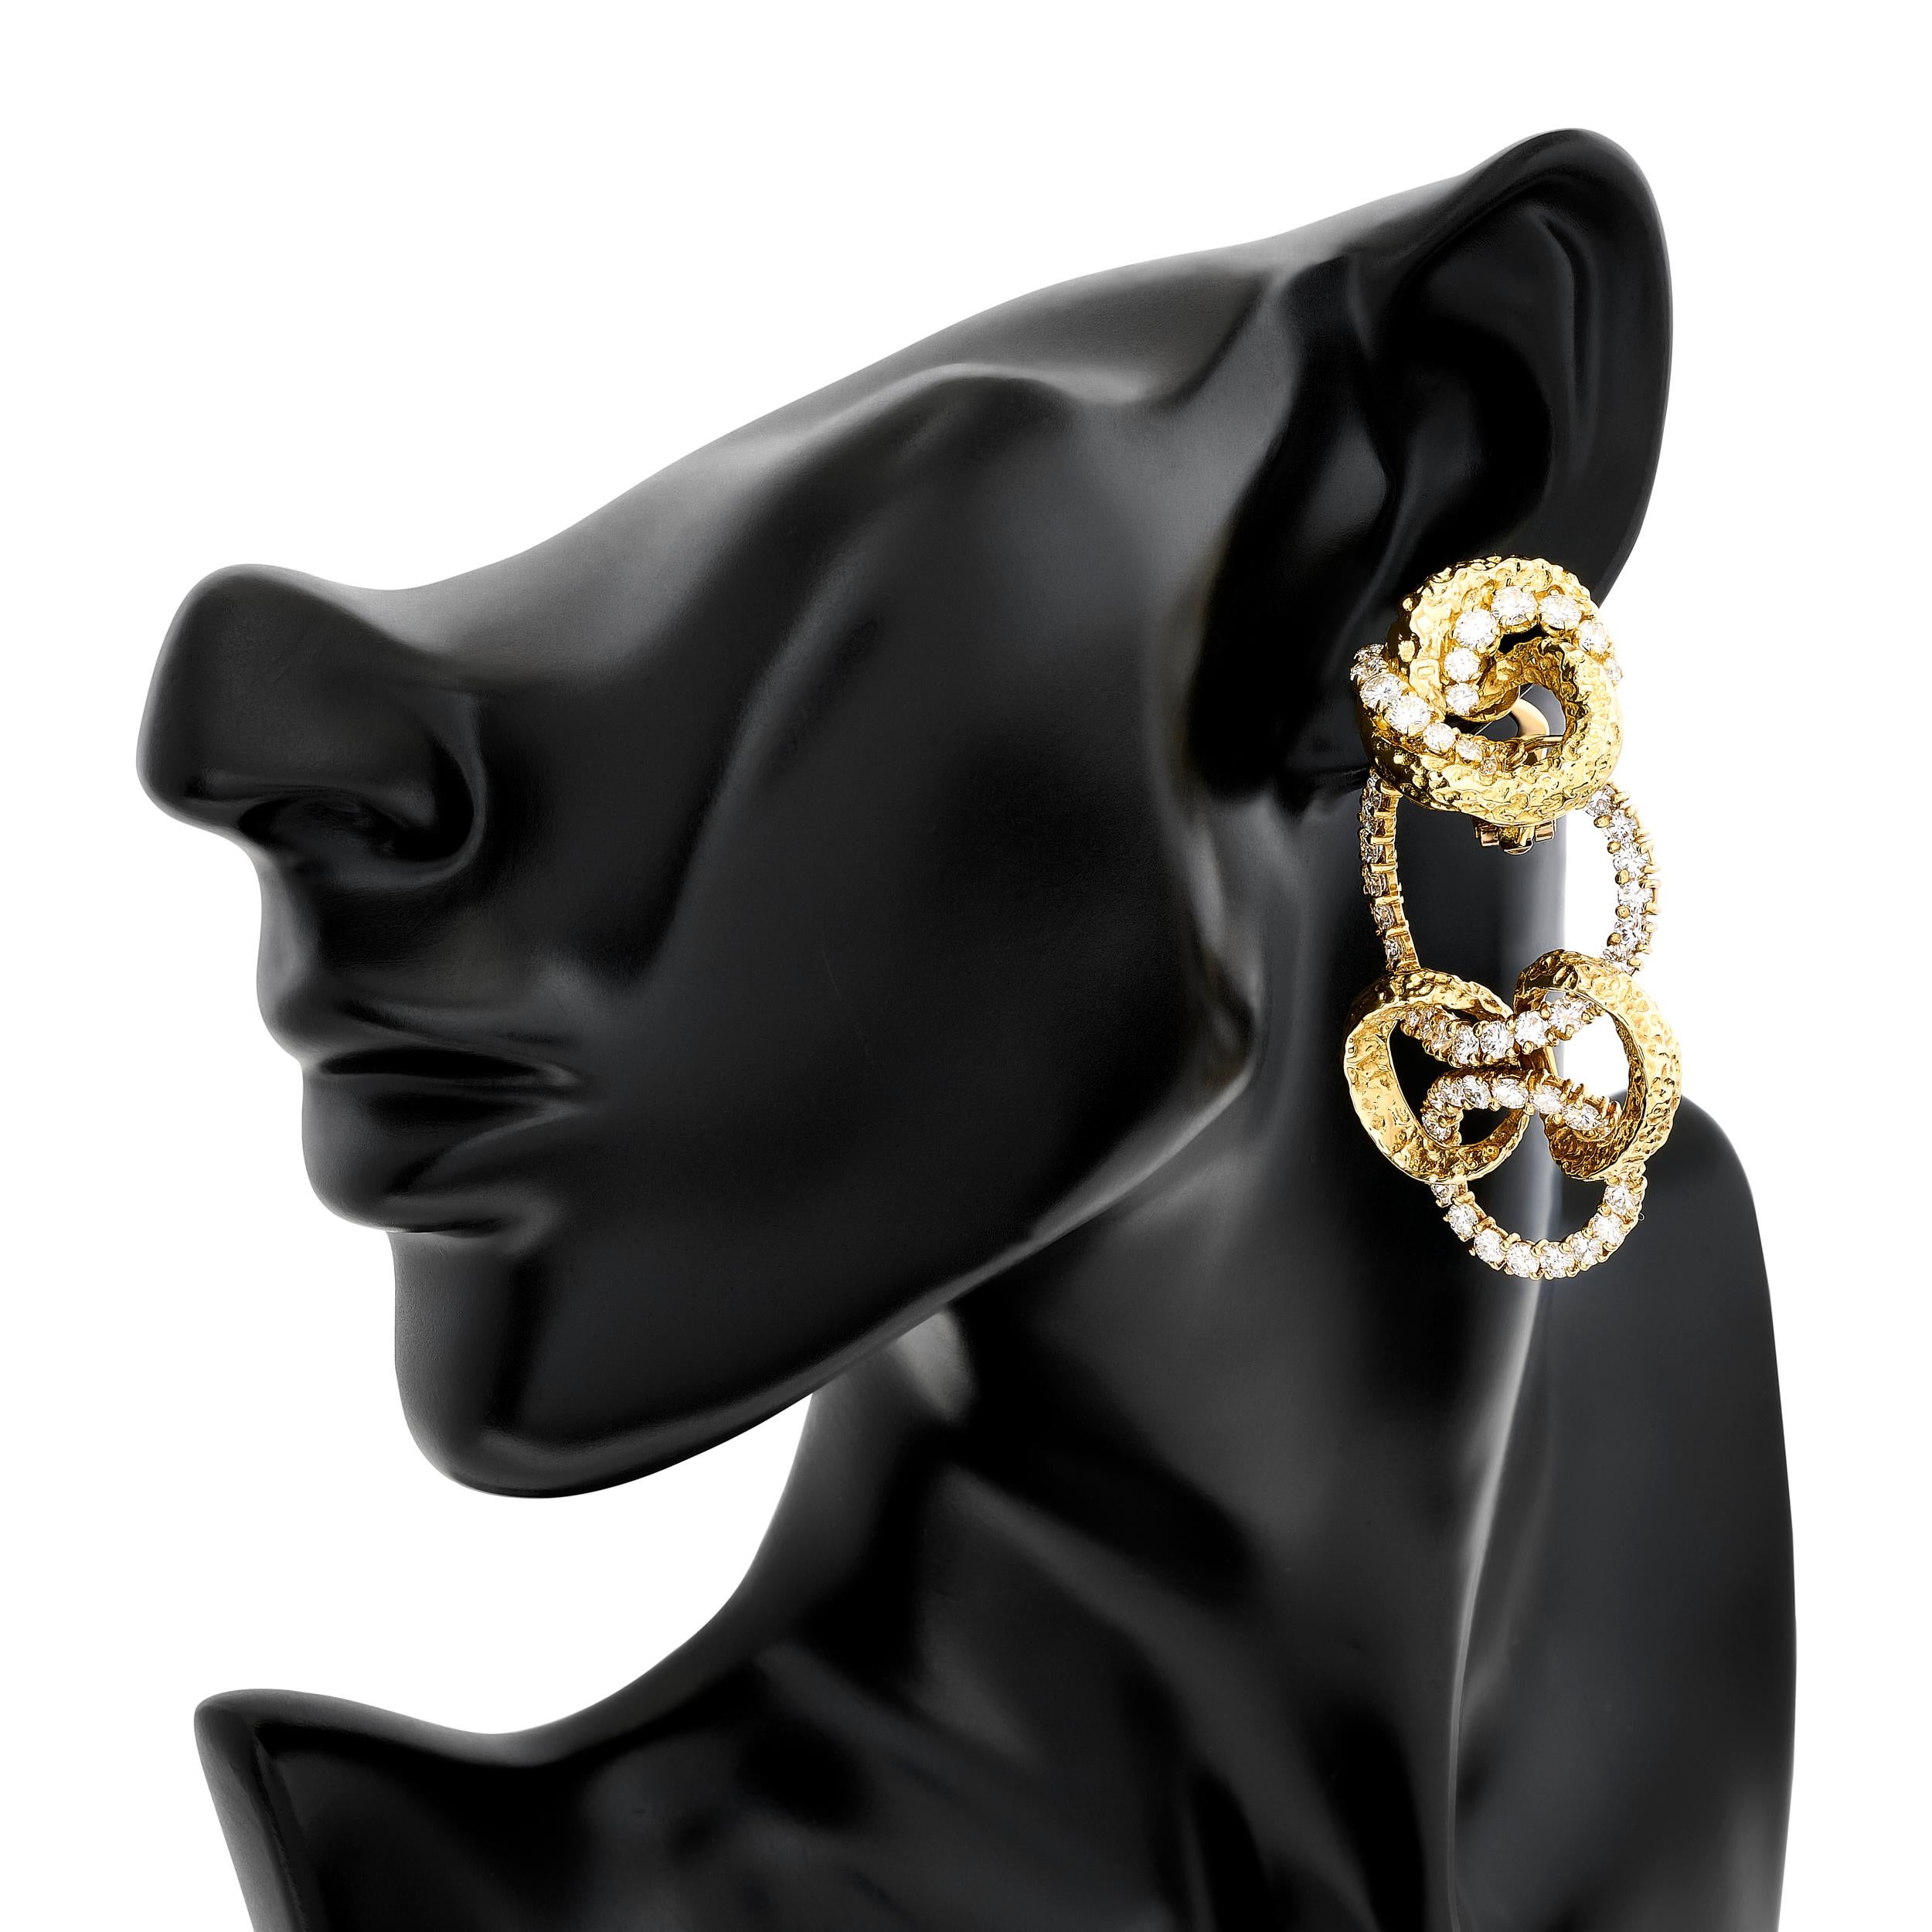 Elevate your style with these exquisite M. Gérard earrings. Crafted with 18k yellow gold and adorned with diamonds, their detachable dangles add a touch of versatility. Effortlessly transition from day to night, making a glamorous statement with